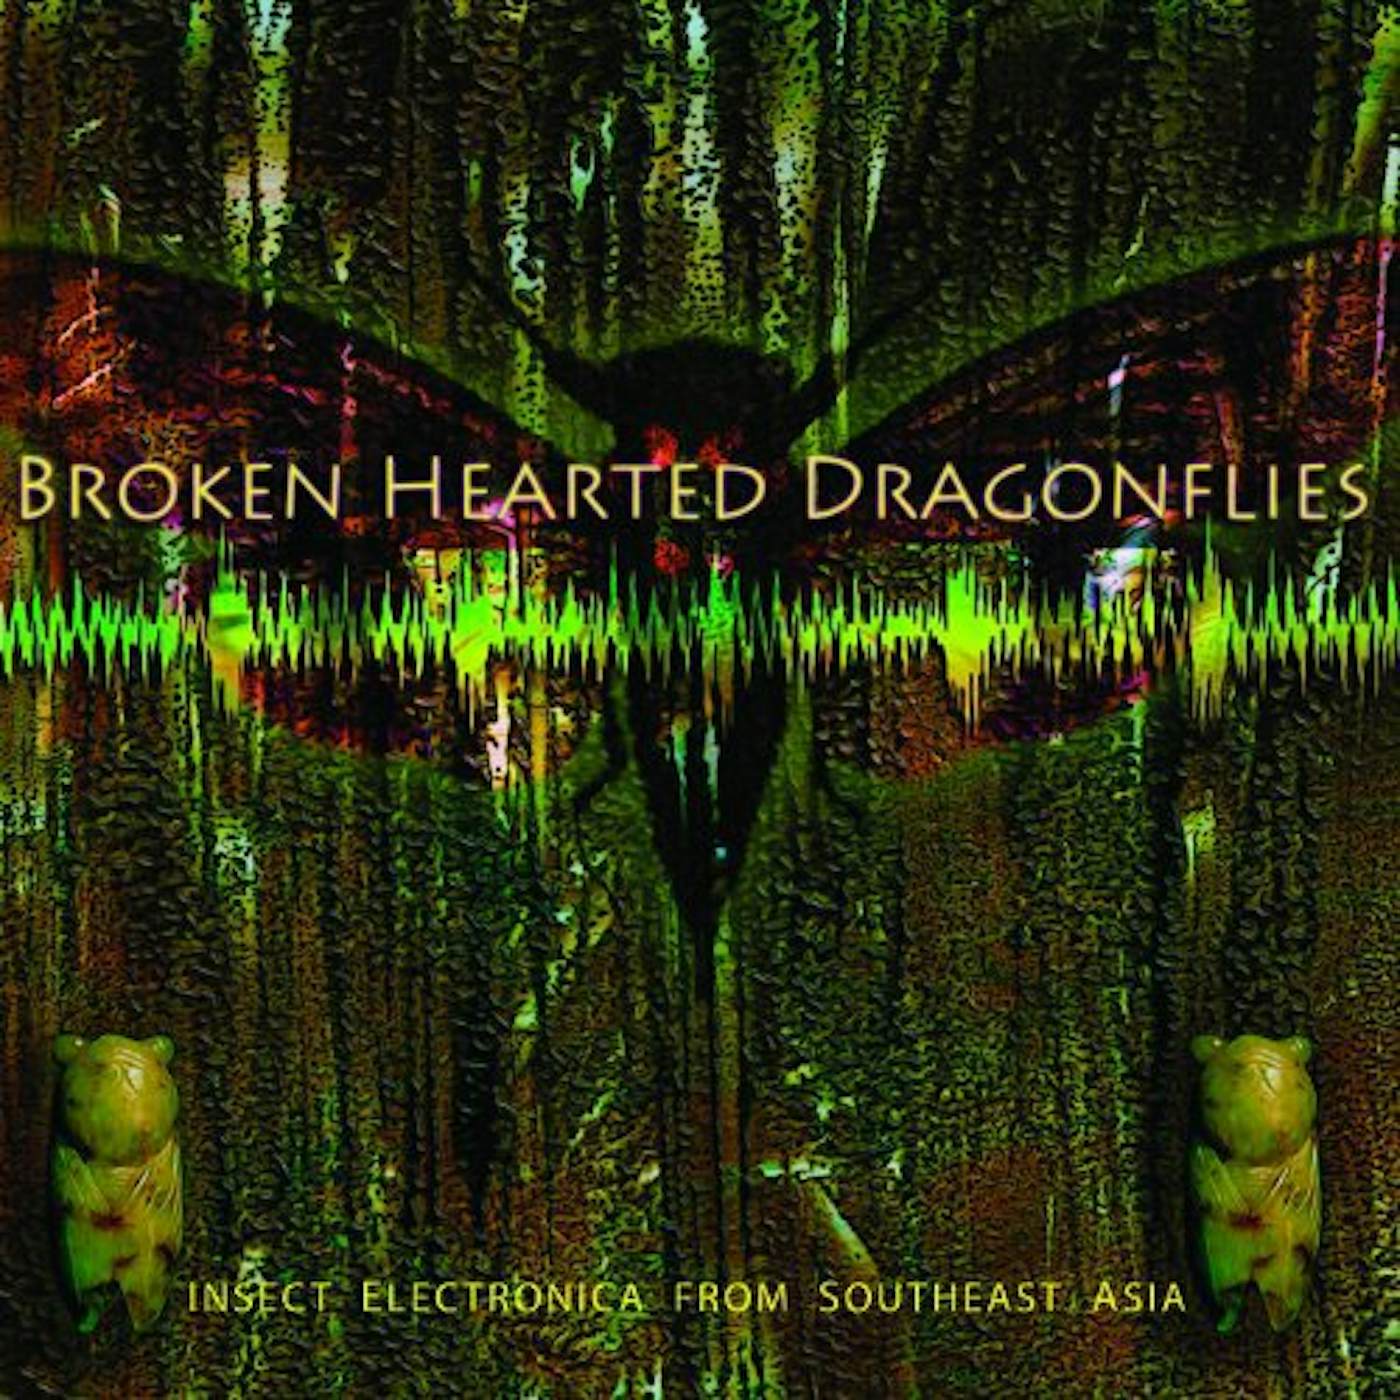 Tucker Martine BROKENHEARTED DRAGONFLIES: INSECT ELECTRONICA FROM Vinyl Record